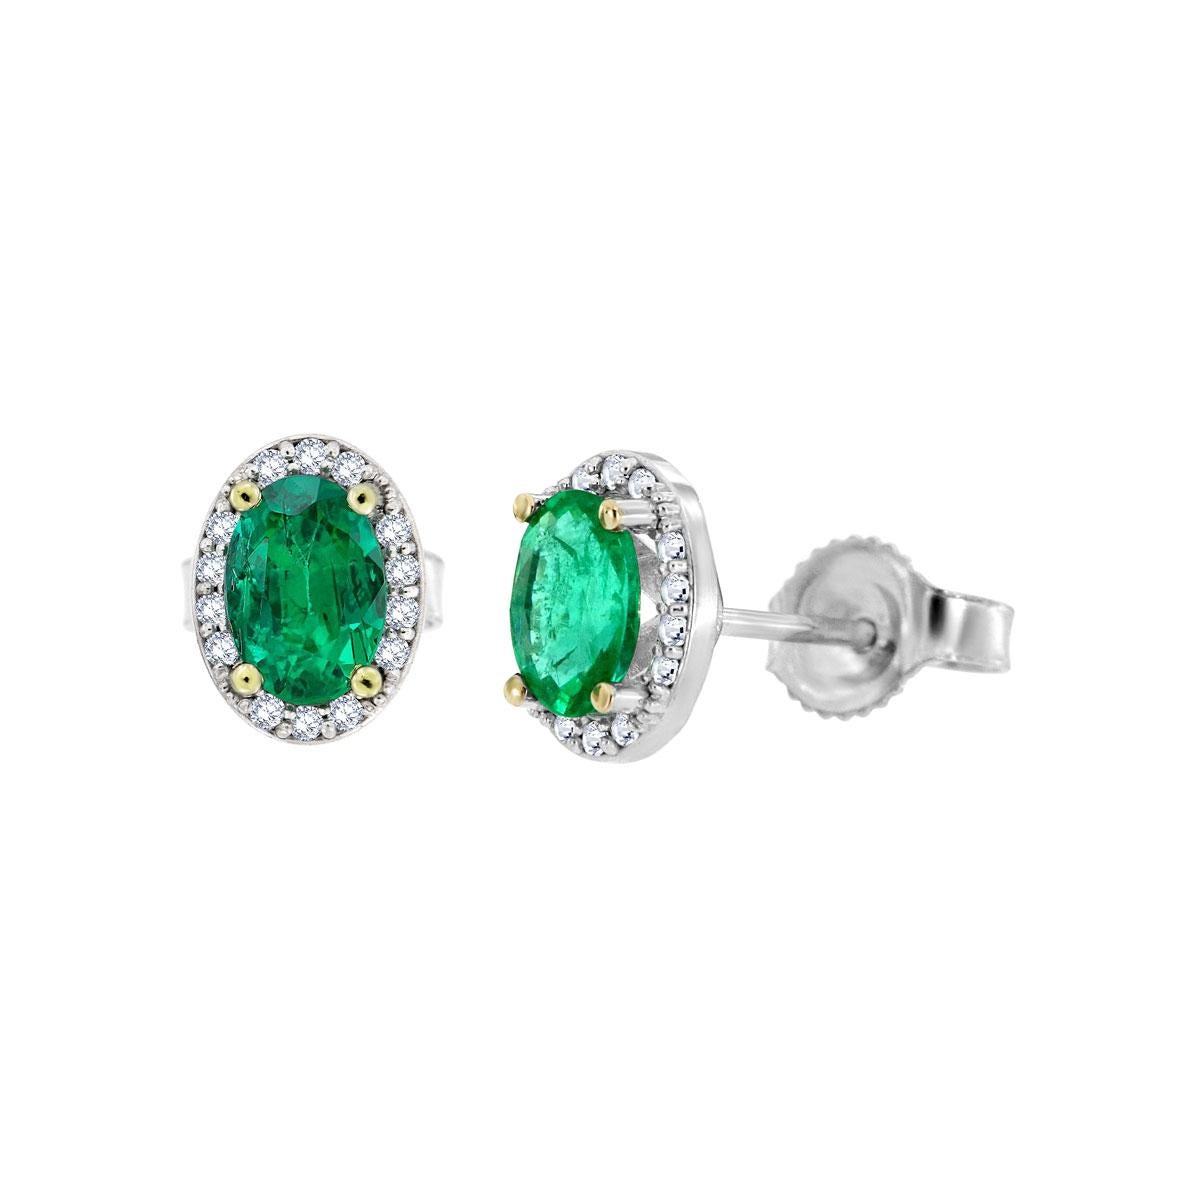 Round Cut 14 Karat White Gold Halo Diamonds and Emeralds Earrings '4/5 Carat' For Sale